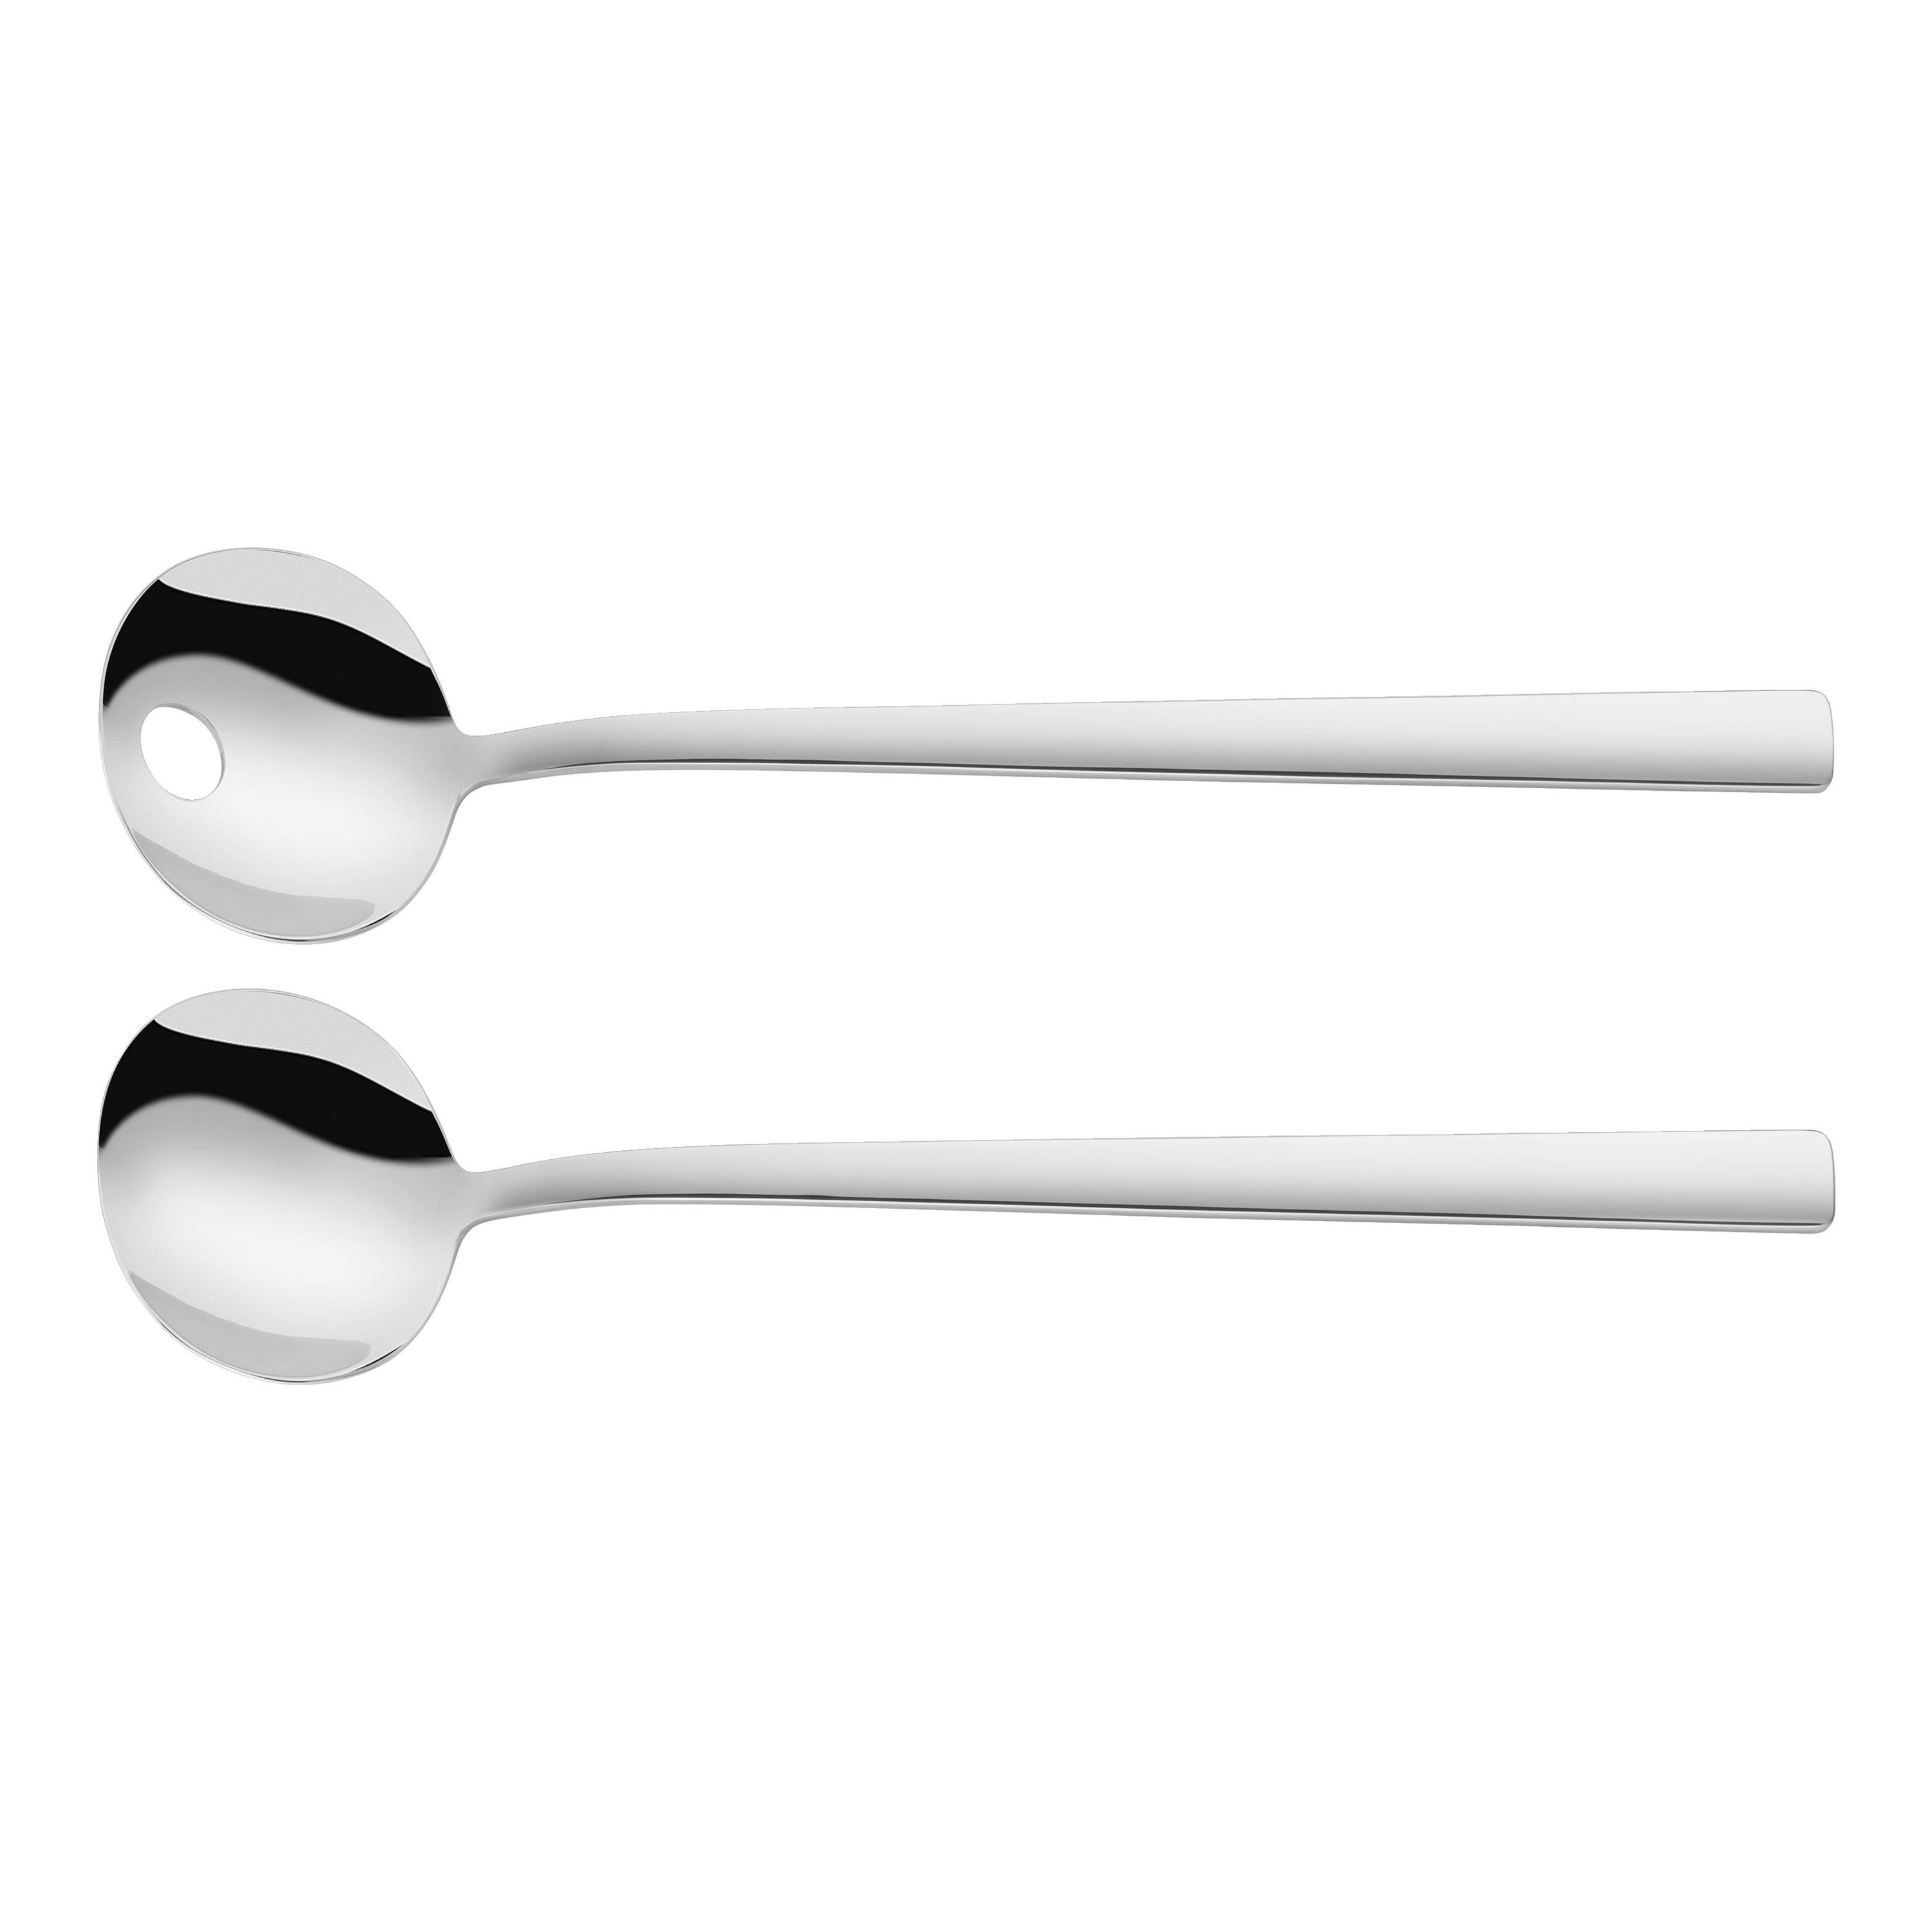 ZWILLING Dinner Couverts à salade 2-pcs, Poli